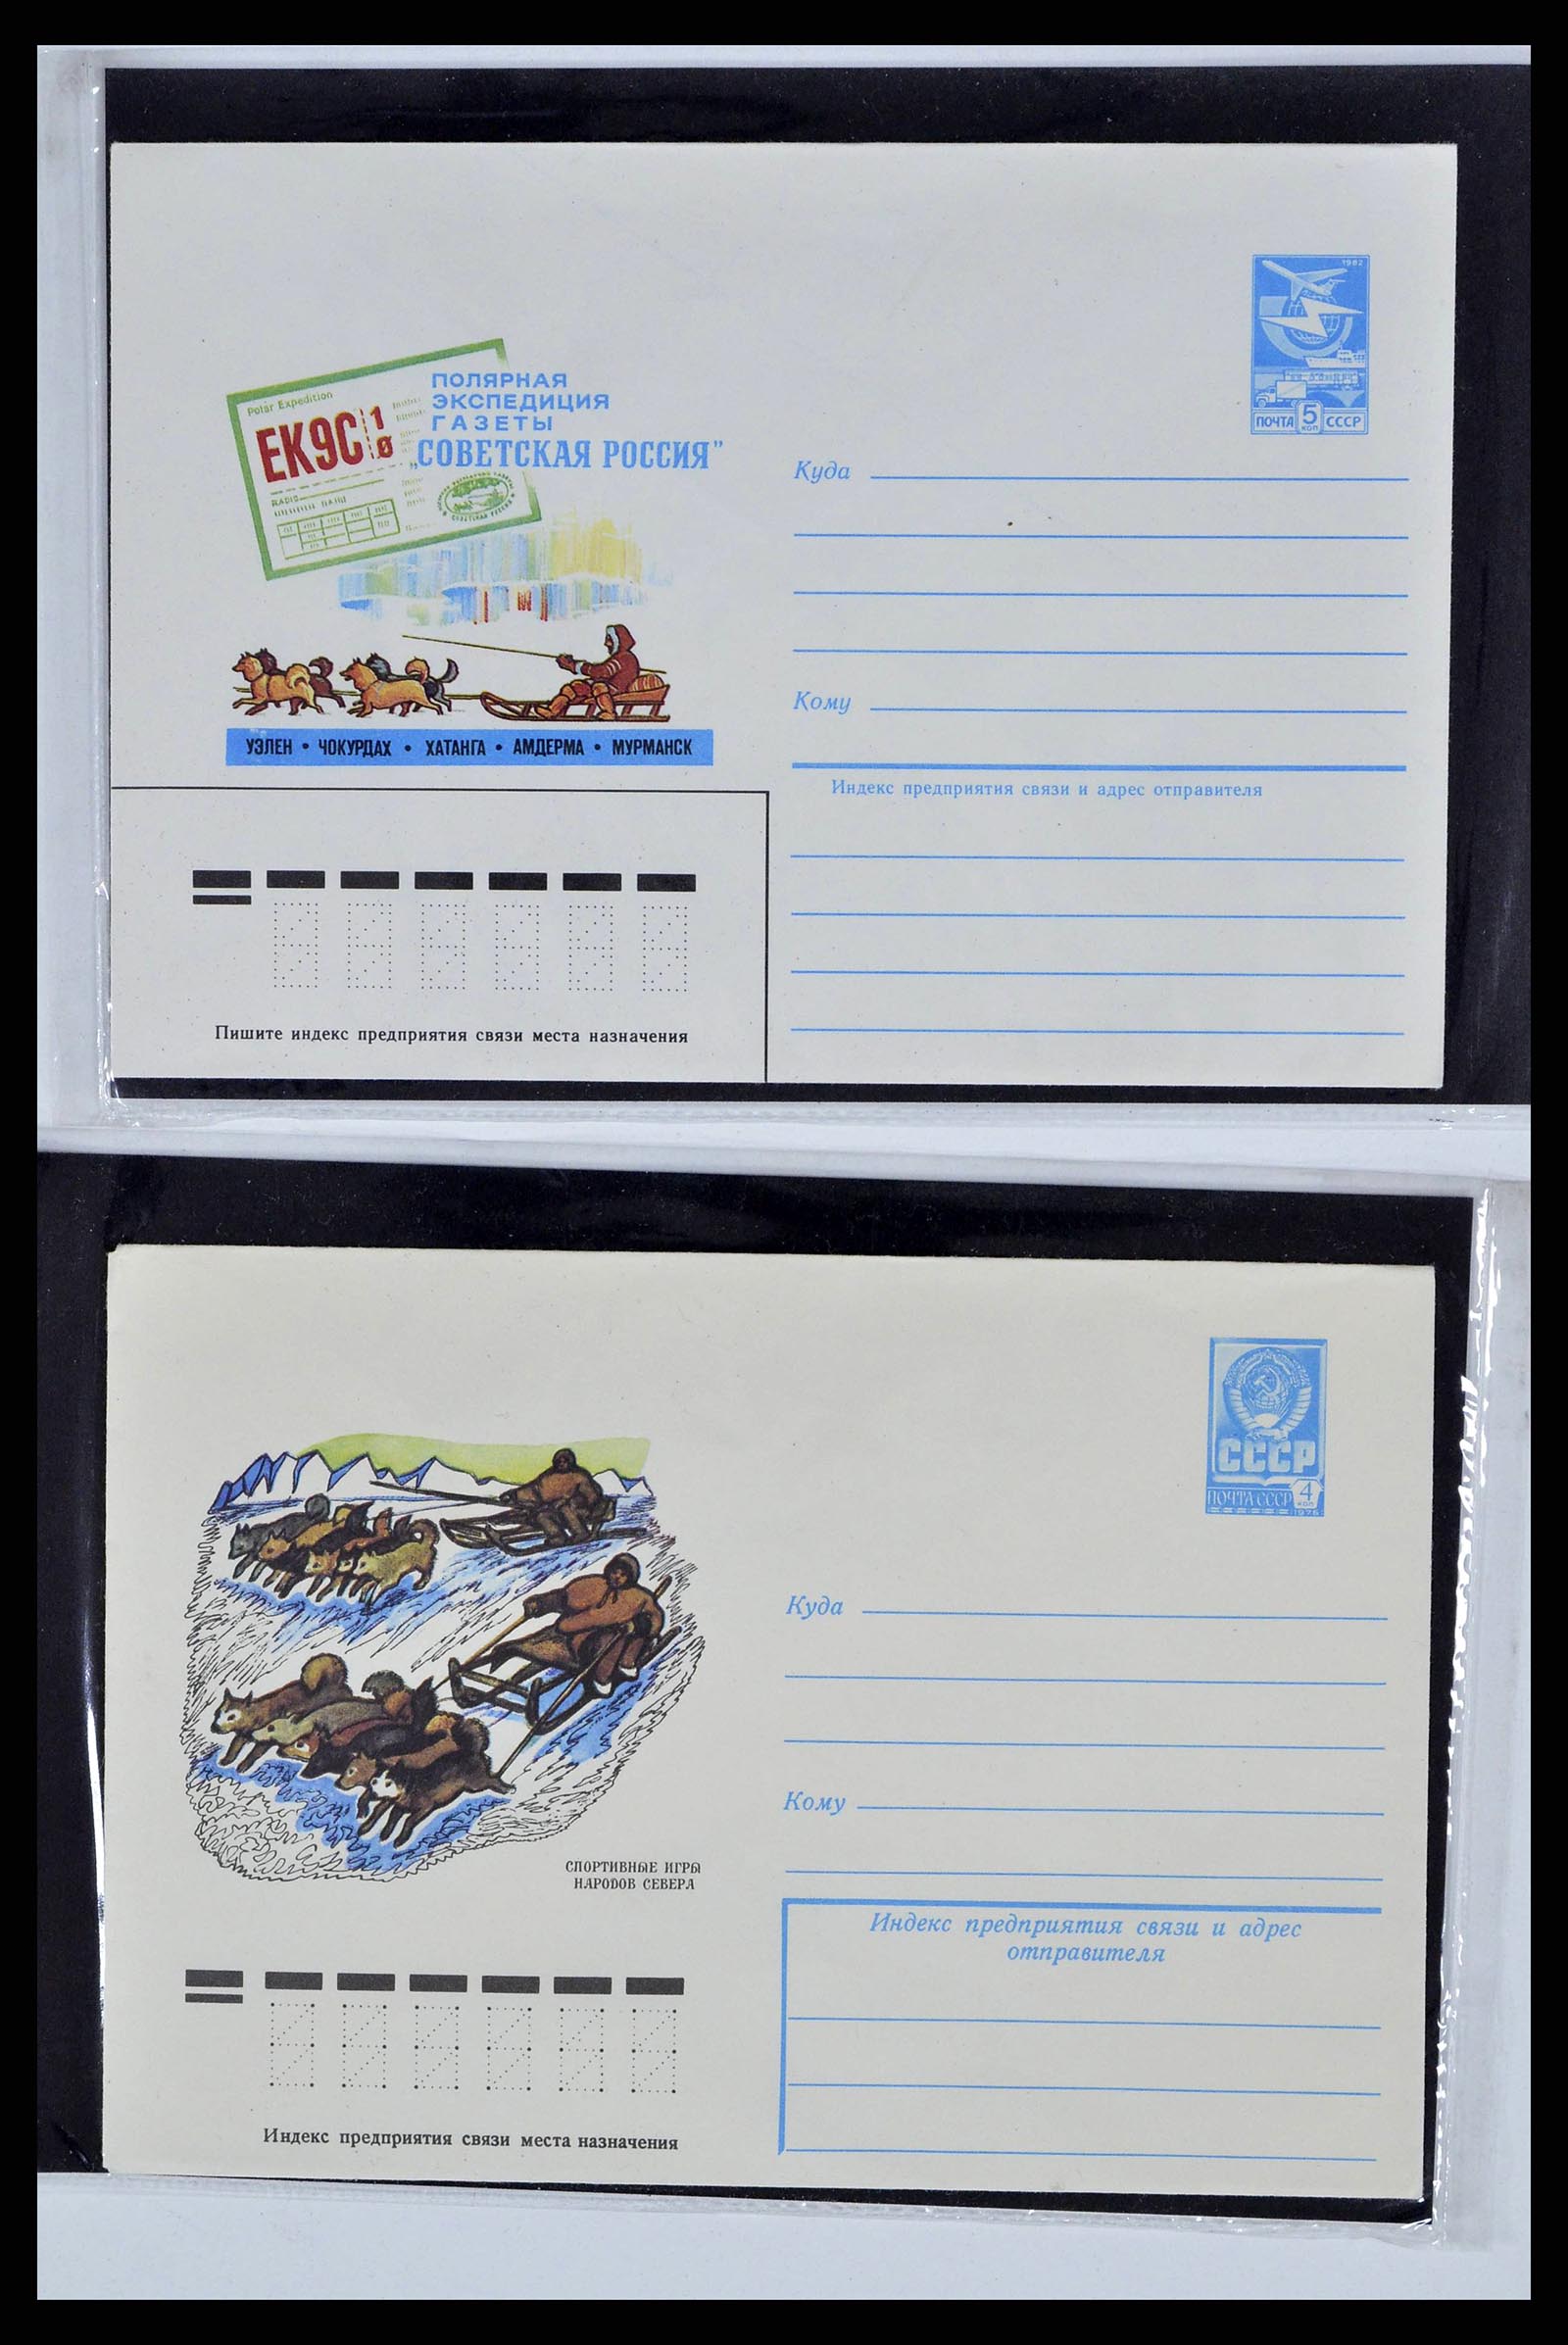 37673 0097 - Stamp collection 37673 Thematics dogs covers 1900-2000.